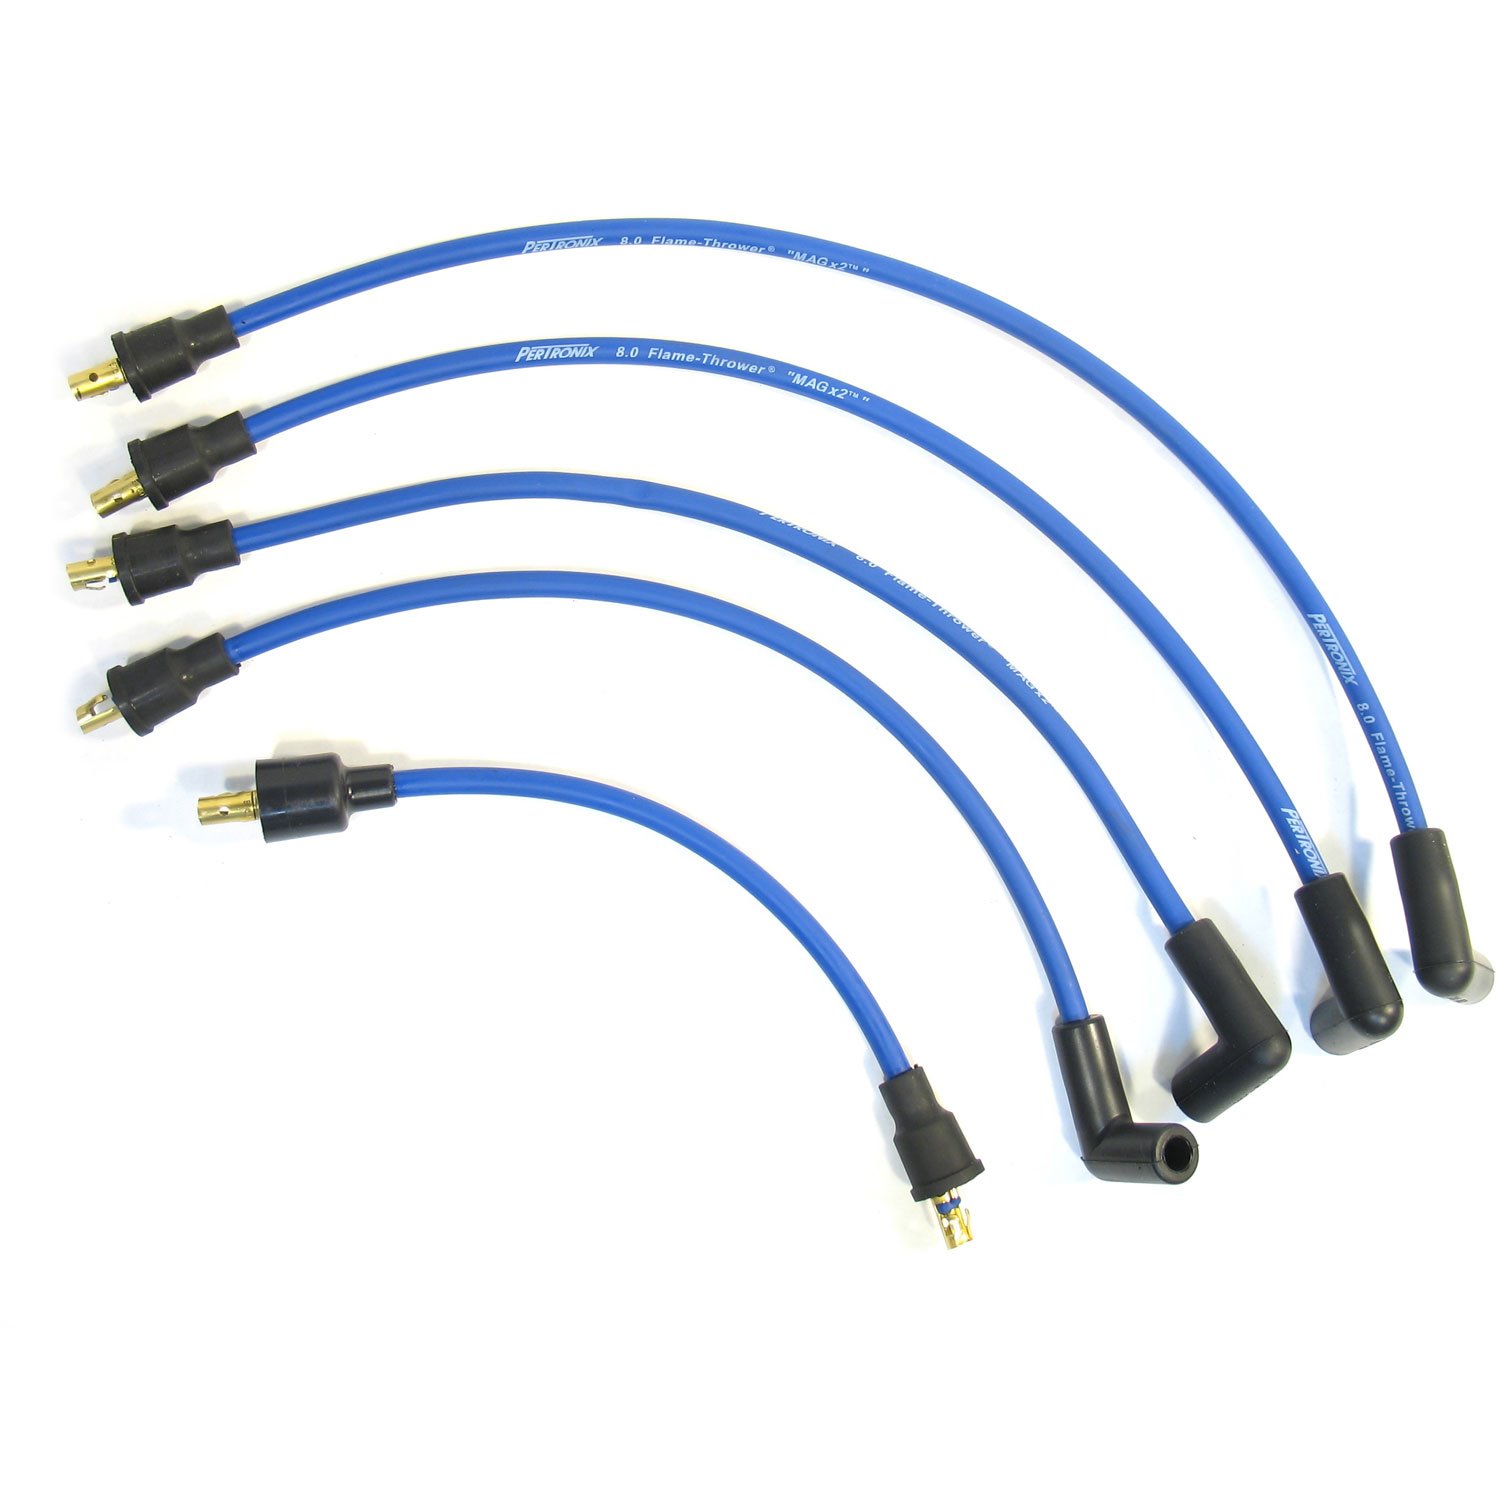 PerTronix 804309 Flame-Thrower Spark Plug Wires 4 cyl 8mm Austin/MG Blue